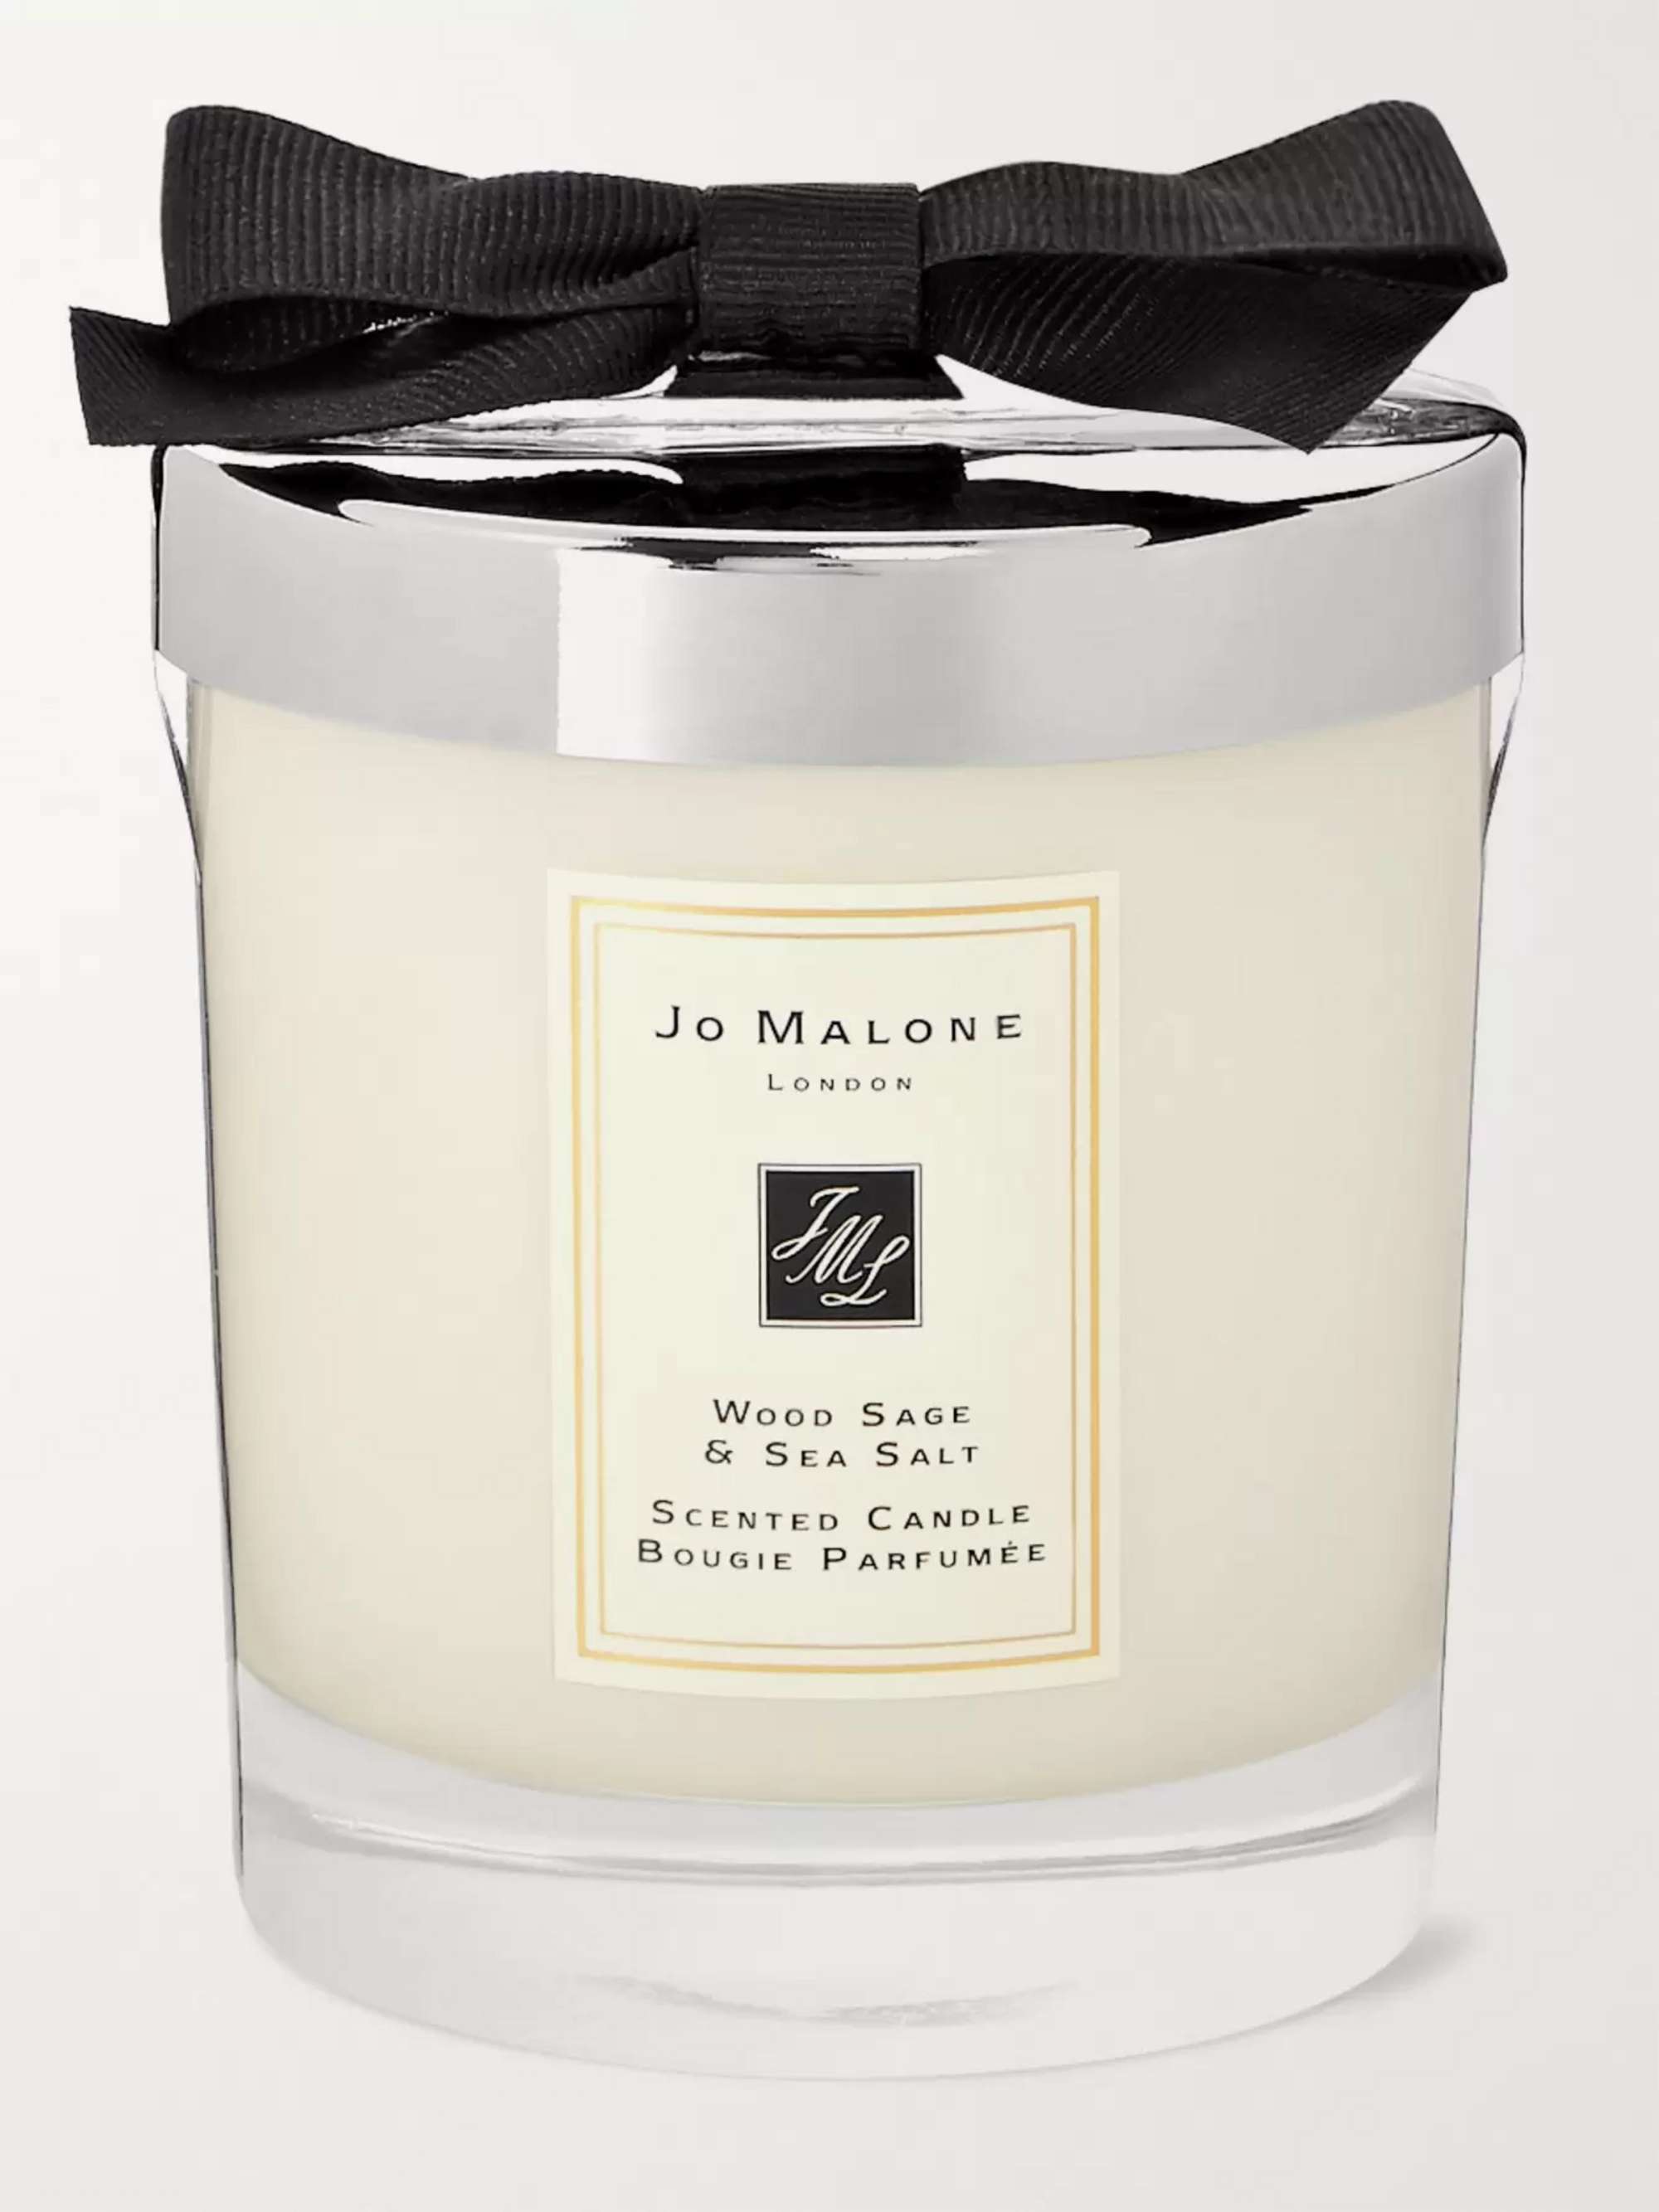 JO MALONE Pomegranate Noir Scented Candle, 200g